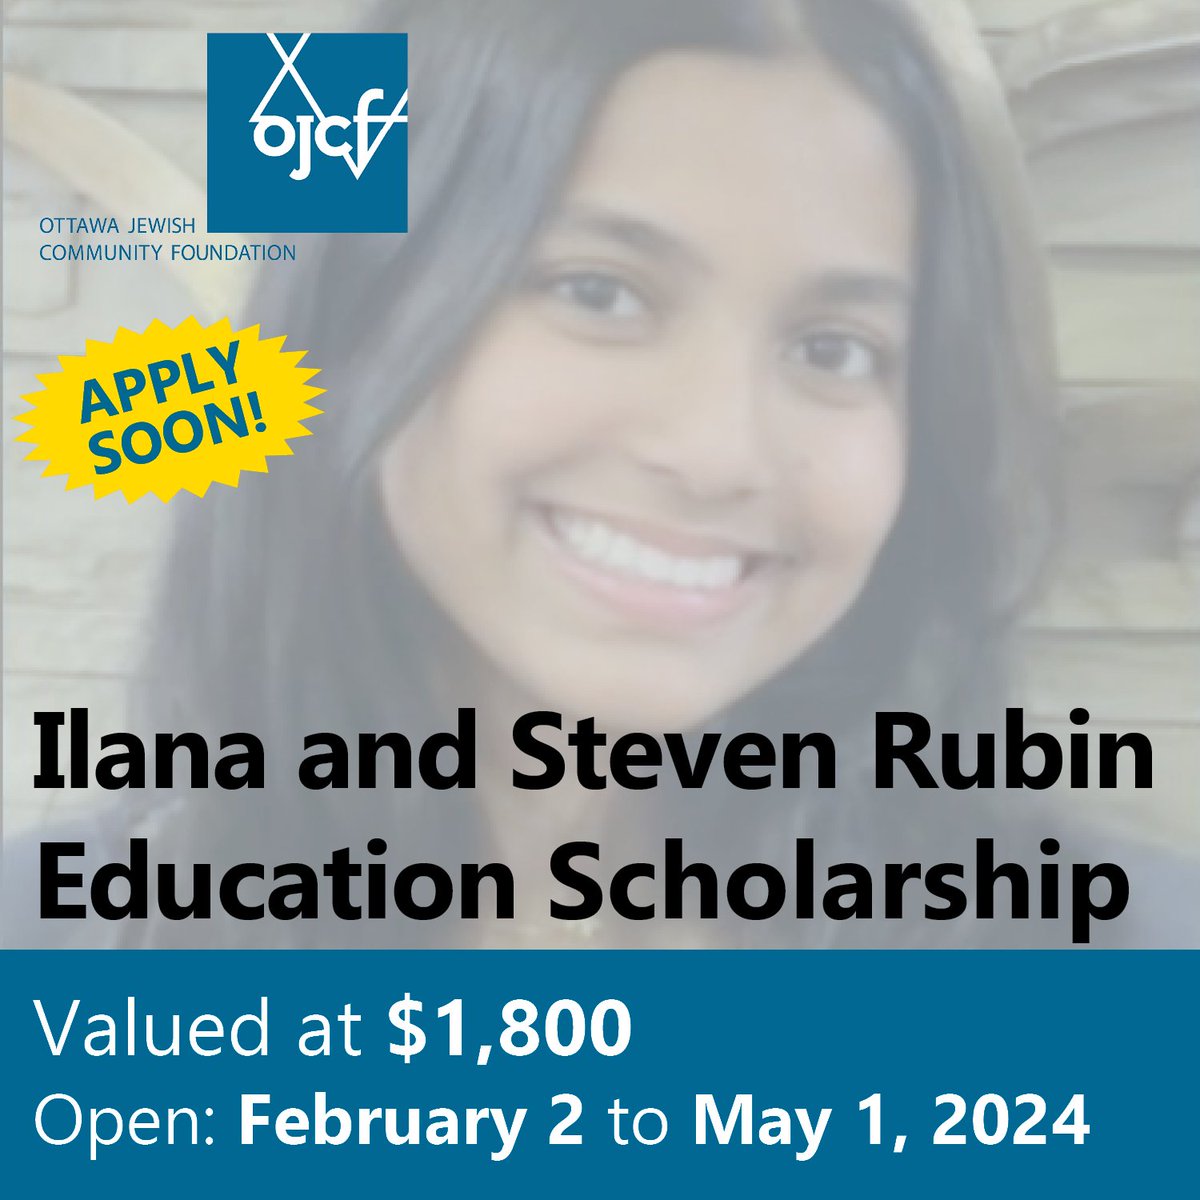 The OJCF is proud to offer scholarships and grants to benefiting our community. Applications are now open and will close on April 15, 2024 (Cooper Scholarship, Lesh Philanthropy Award, WCPP Grant) and May 1, 2024 (Rubin Scholarship) conta.cc/3SJmRQO